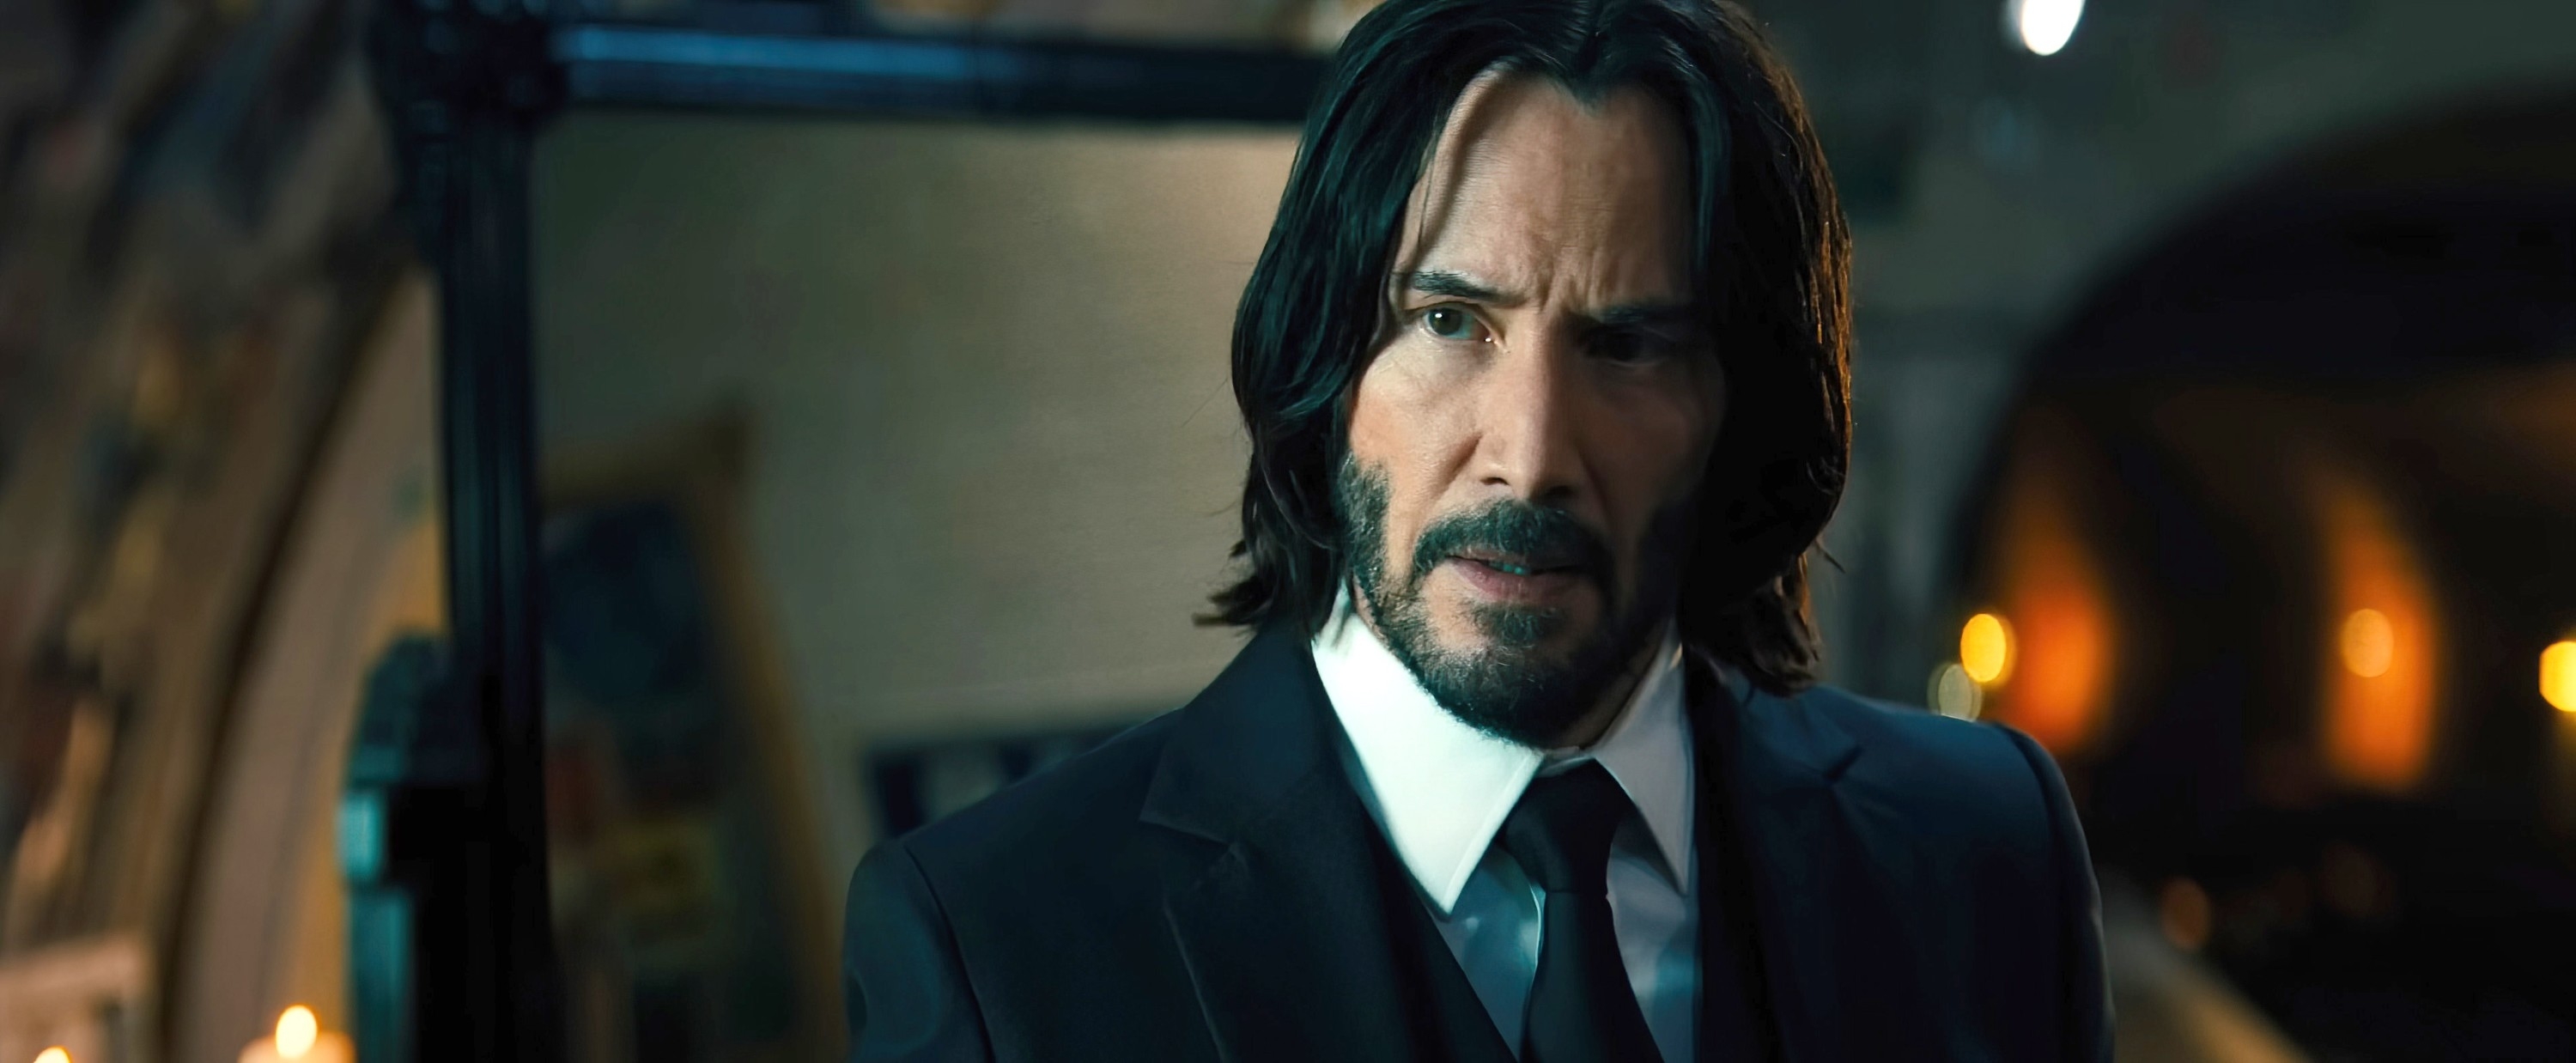 Keanu Reeves wearing a classic black suit and tie in a movie scene